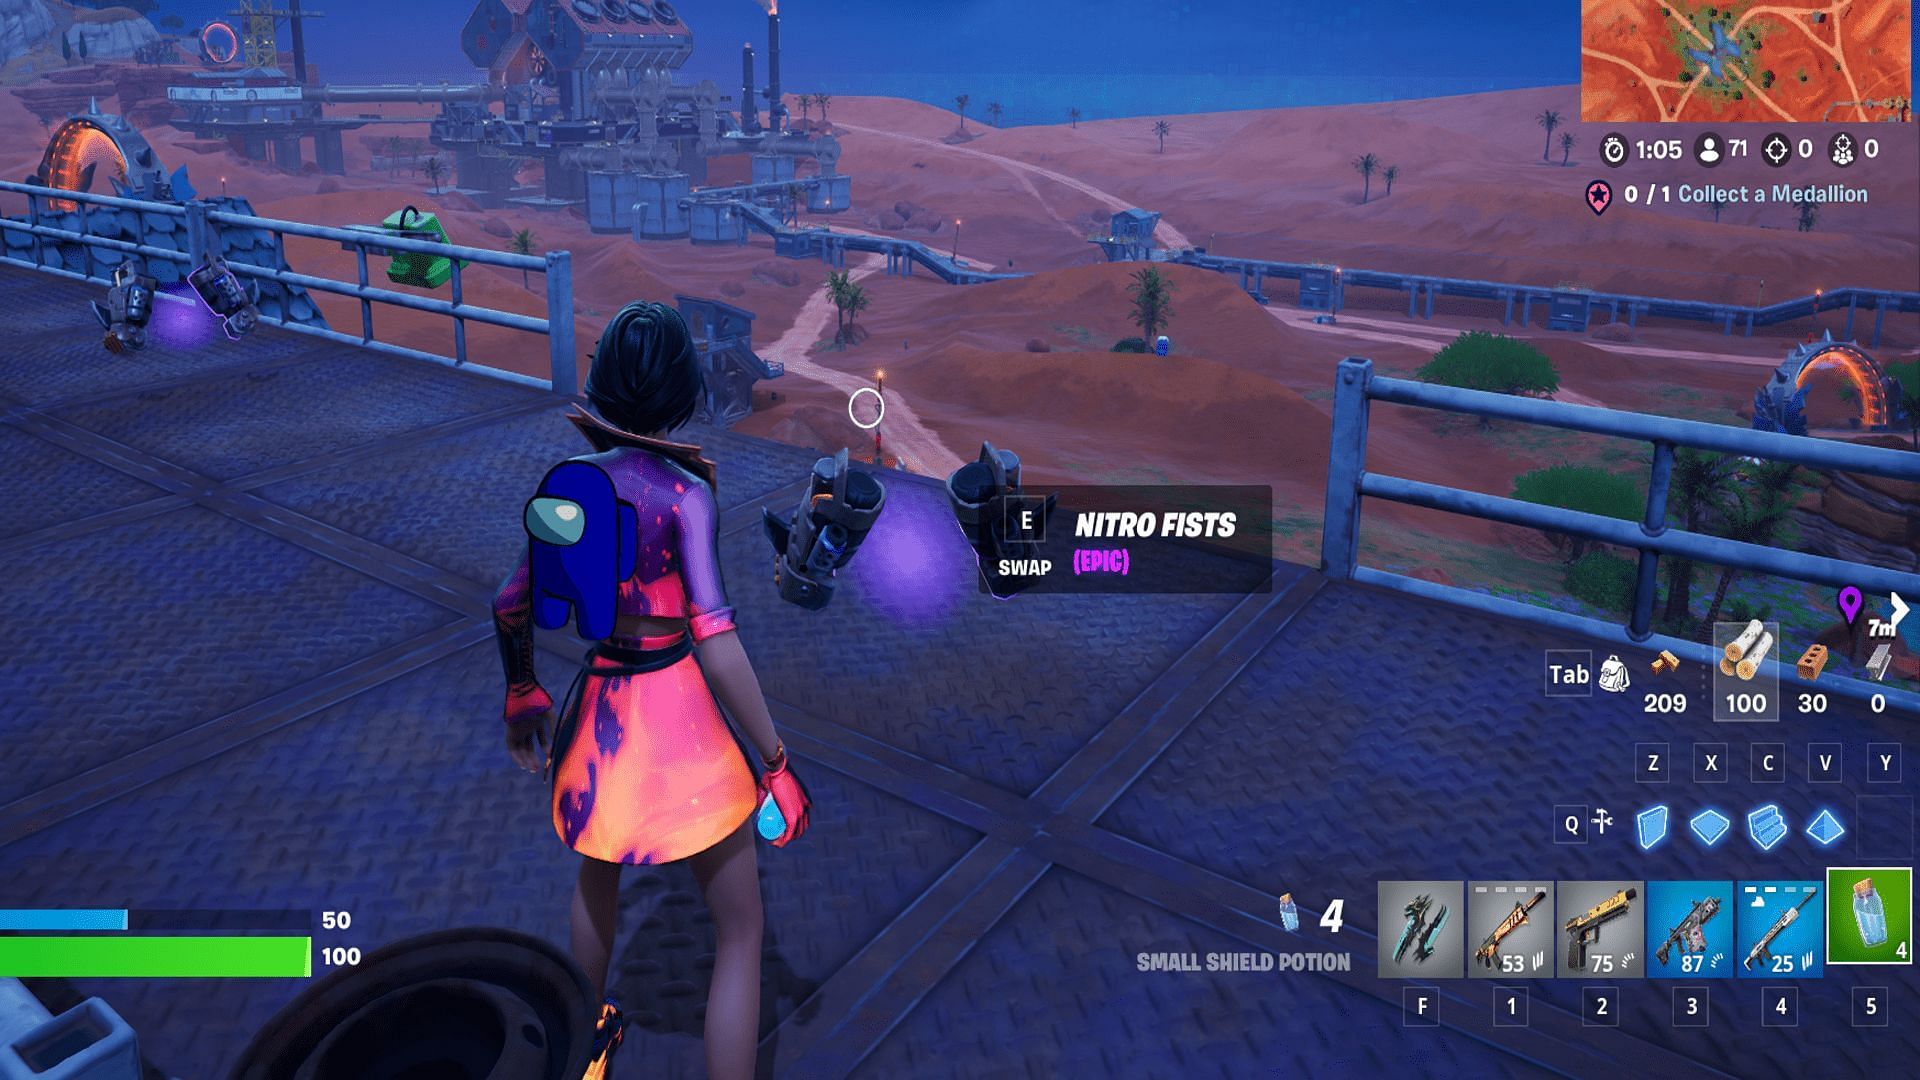 You can find the Nitro Fists spawning randomly across the map and heavily across the new named locations in Fortnite Chapter 5 Season 3 (Image via Epic Games / Fortnite)